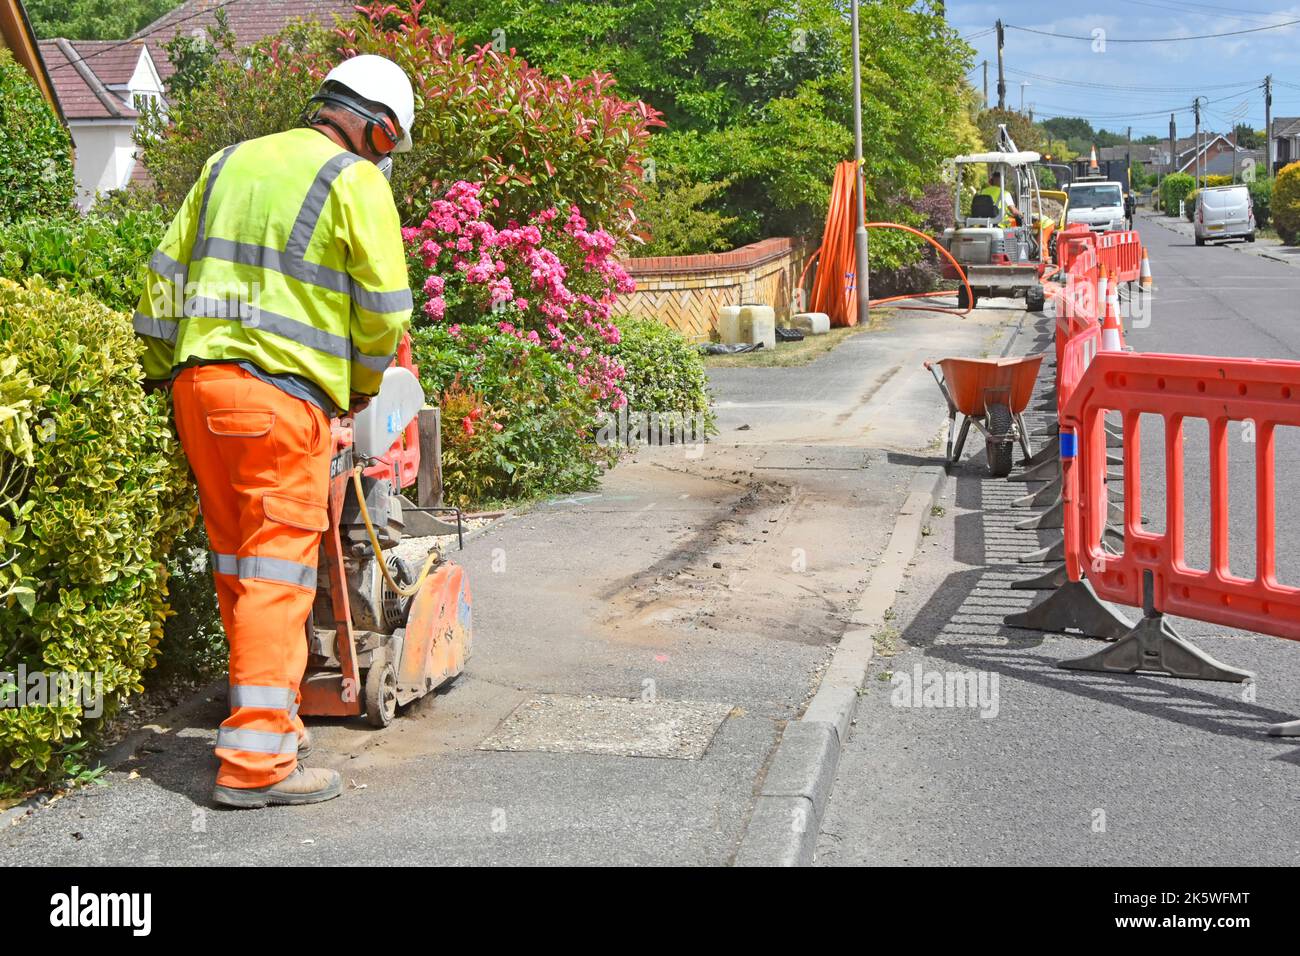 Health & safety kit worn by road works construction site worker using disc saw cutting machine new underground broadband cable infrastructure site UK Stock Photo